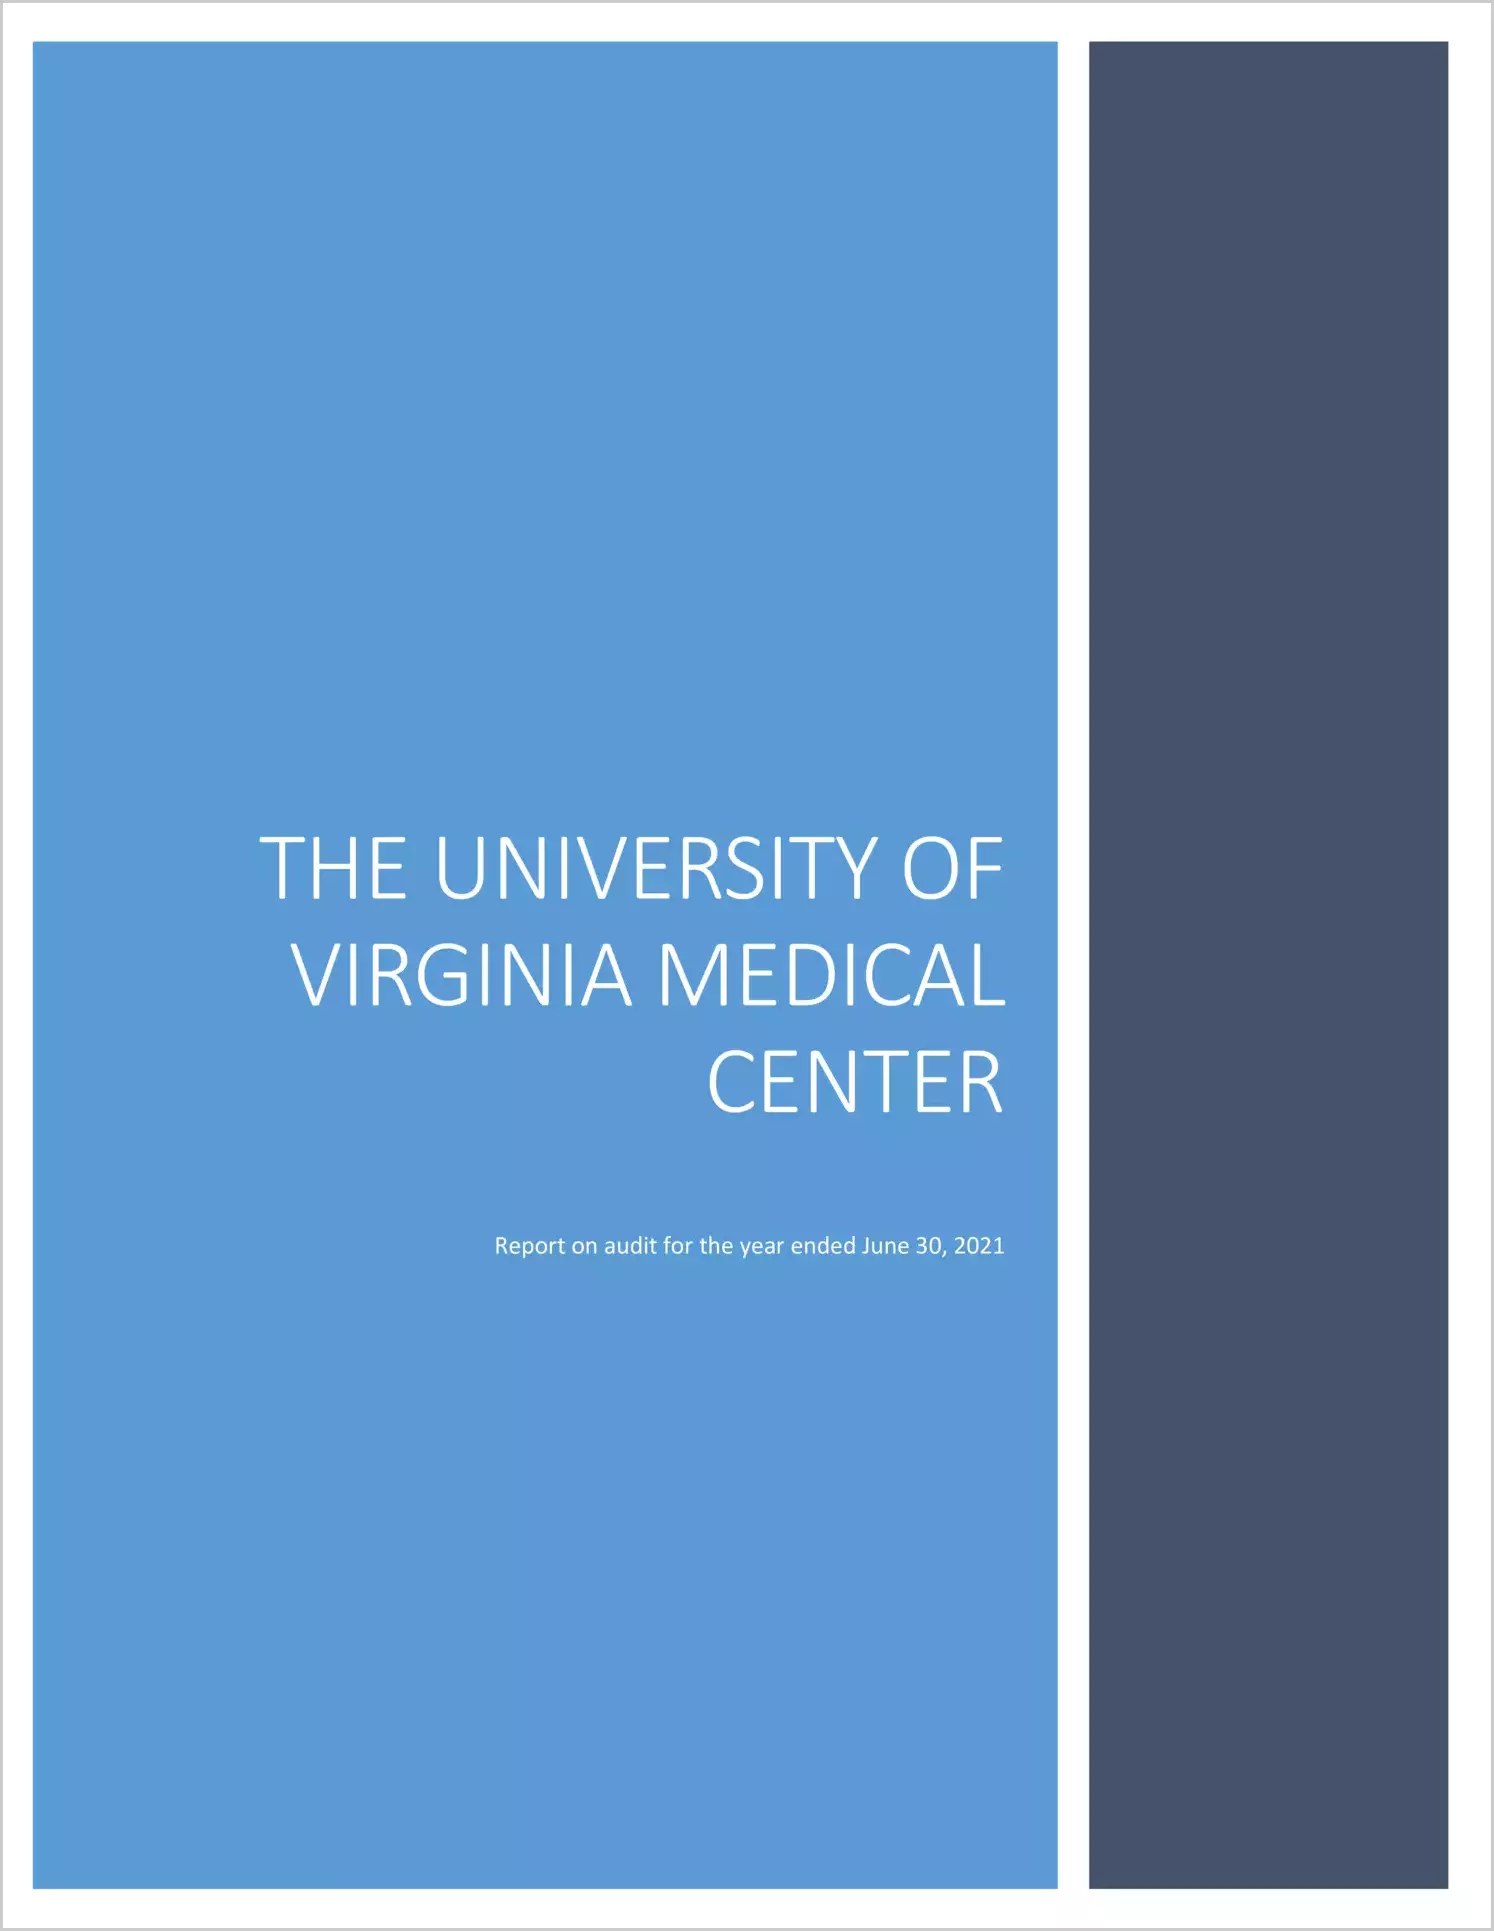 University of Virginia Medical Center Financial Statements for the year ended June 30, 2021